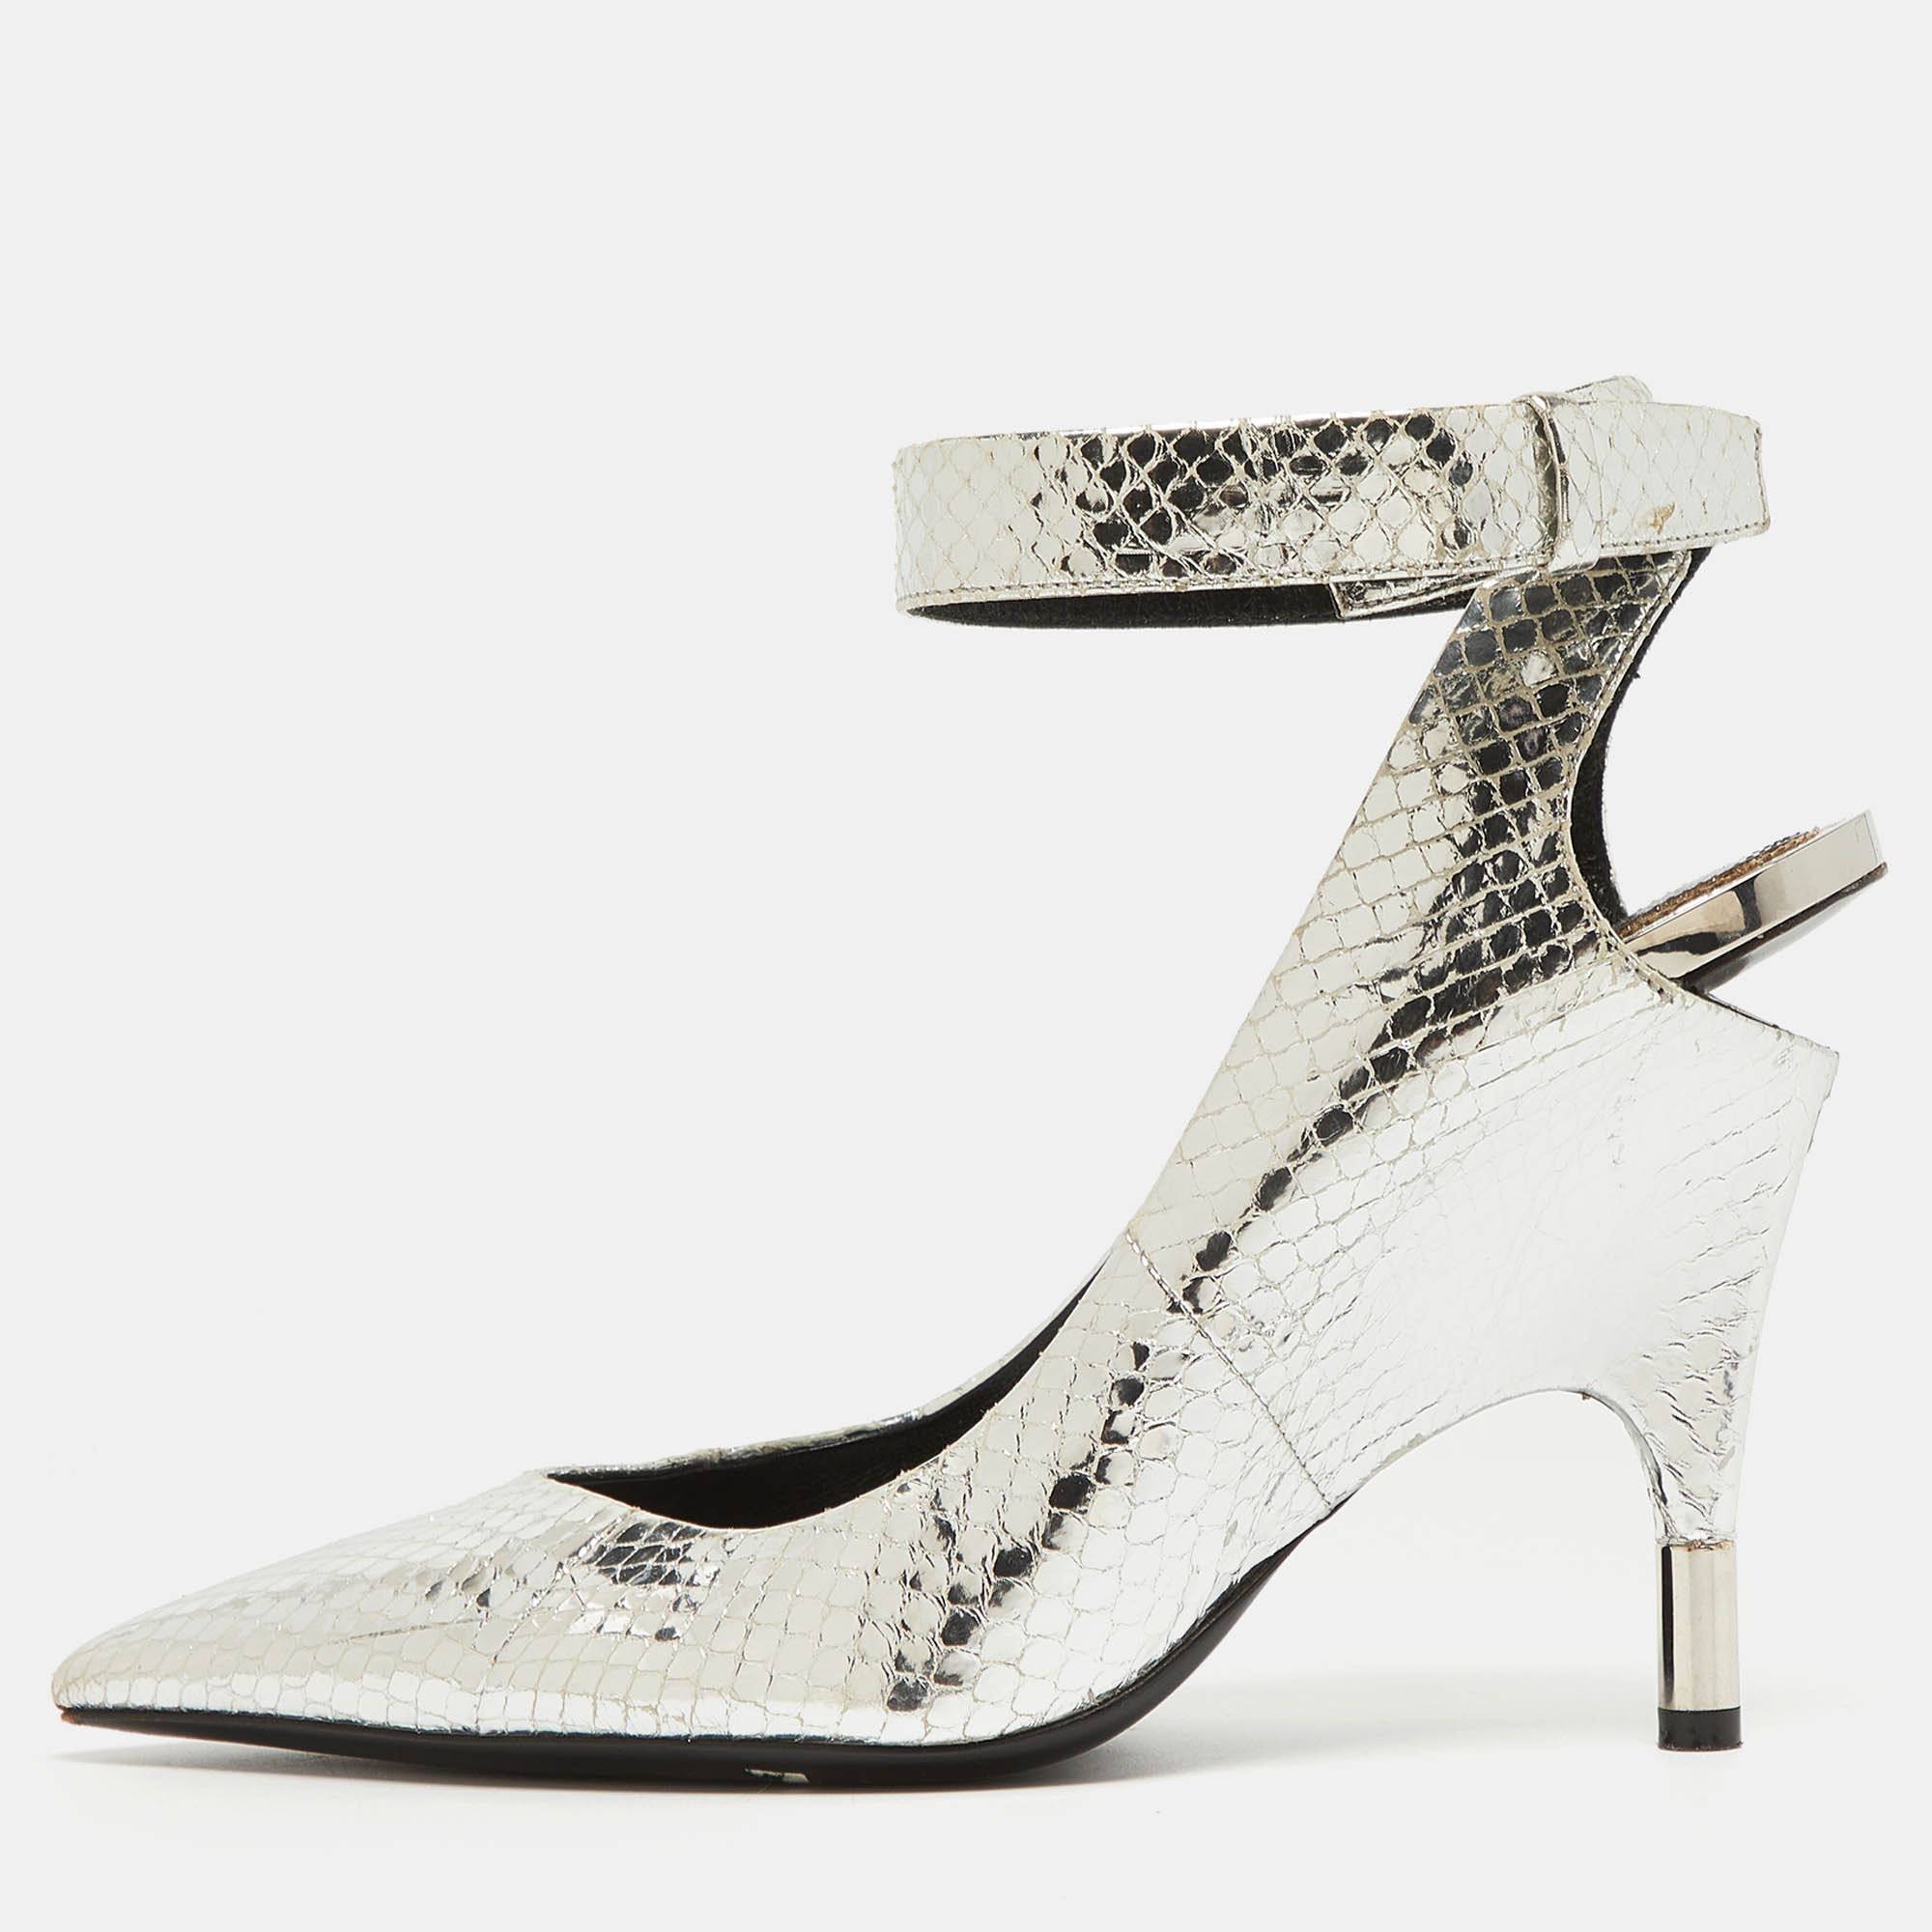 Tom ford silver python embossed leather ankle strap pumps size 38